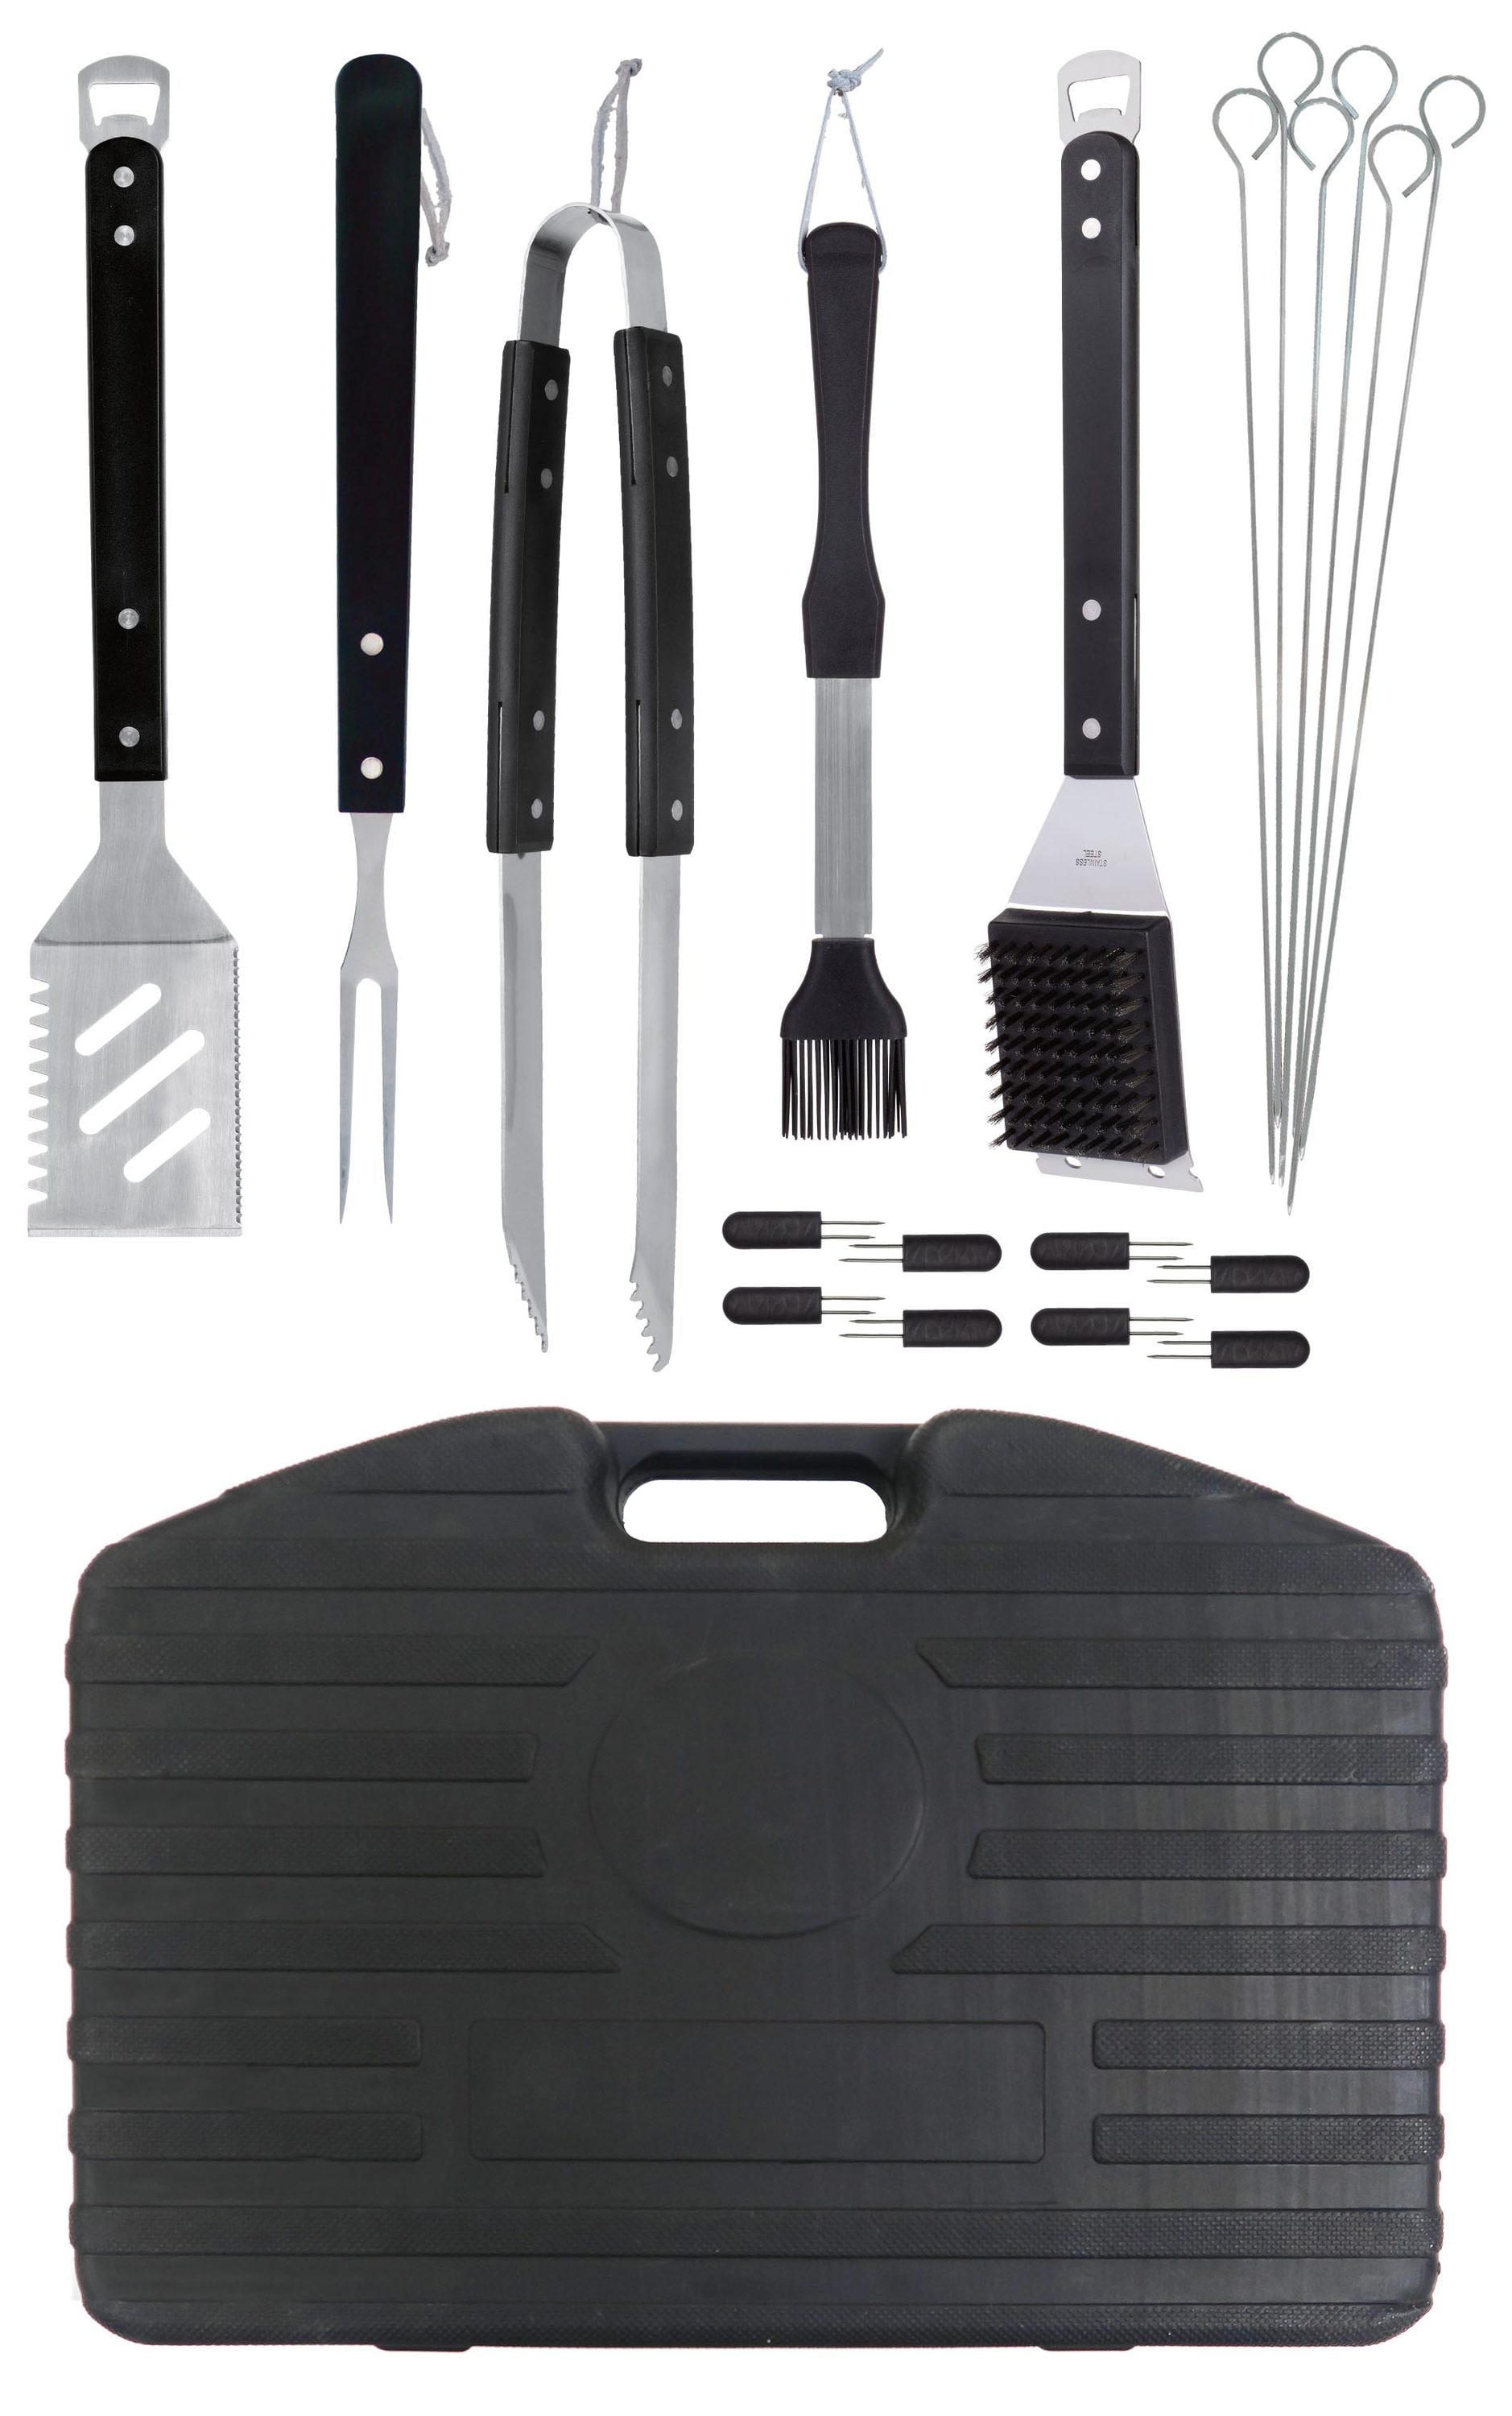 Mr. Bar-B-Q 18 or 20 piece Stainless Steel Tool Sets, $14.99, free pickup, Lowe's